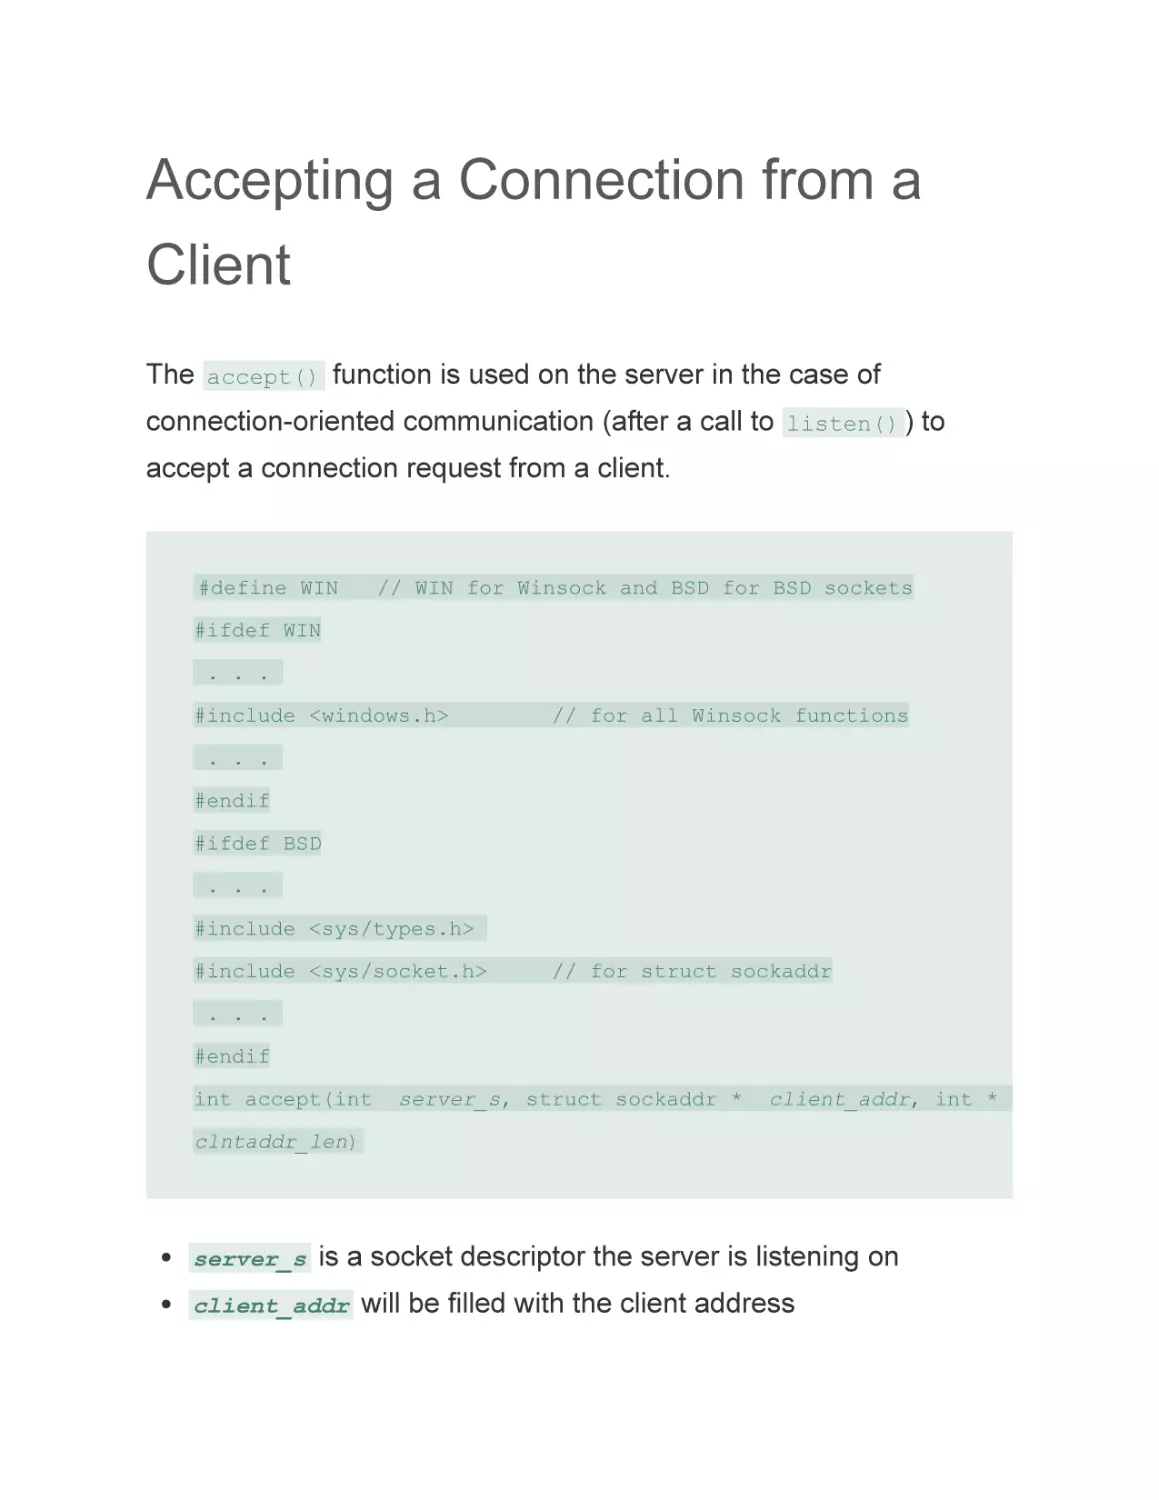 Accepting a Connection from a Client